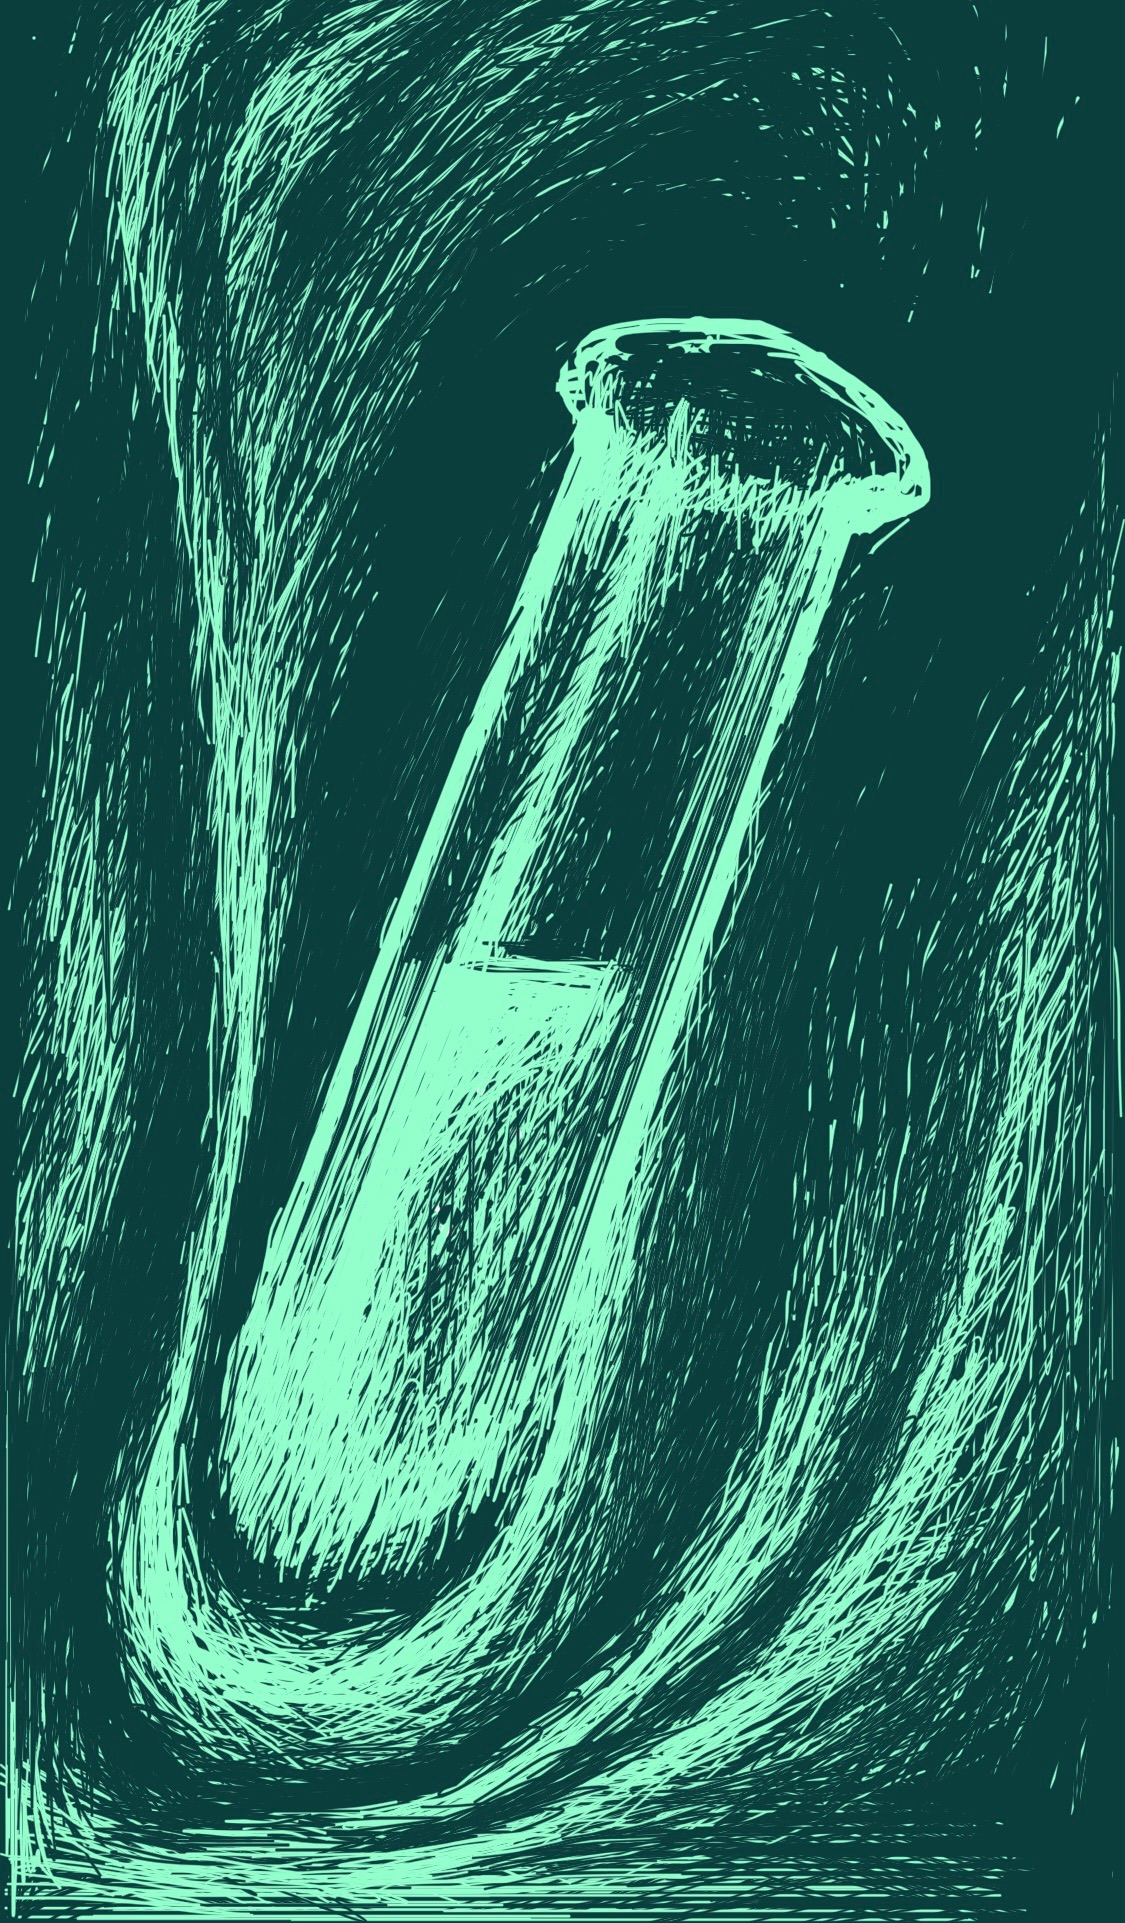 A glowing test tube